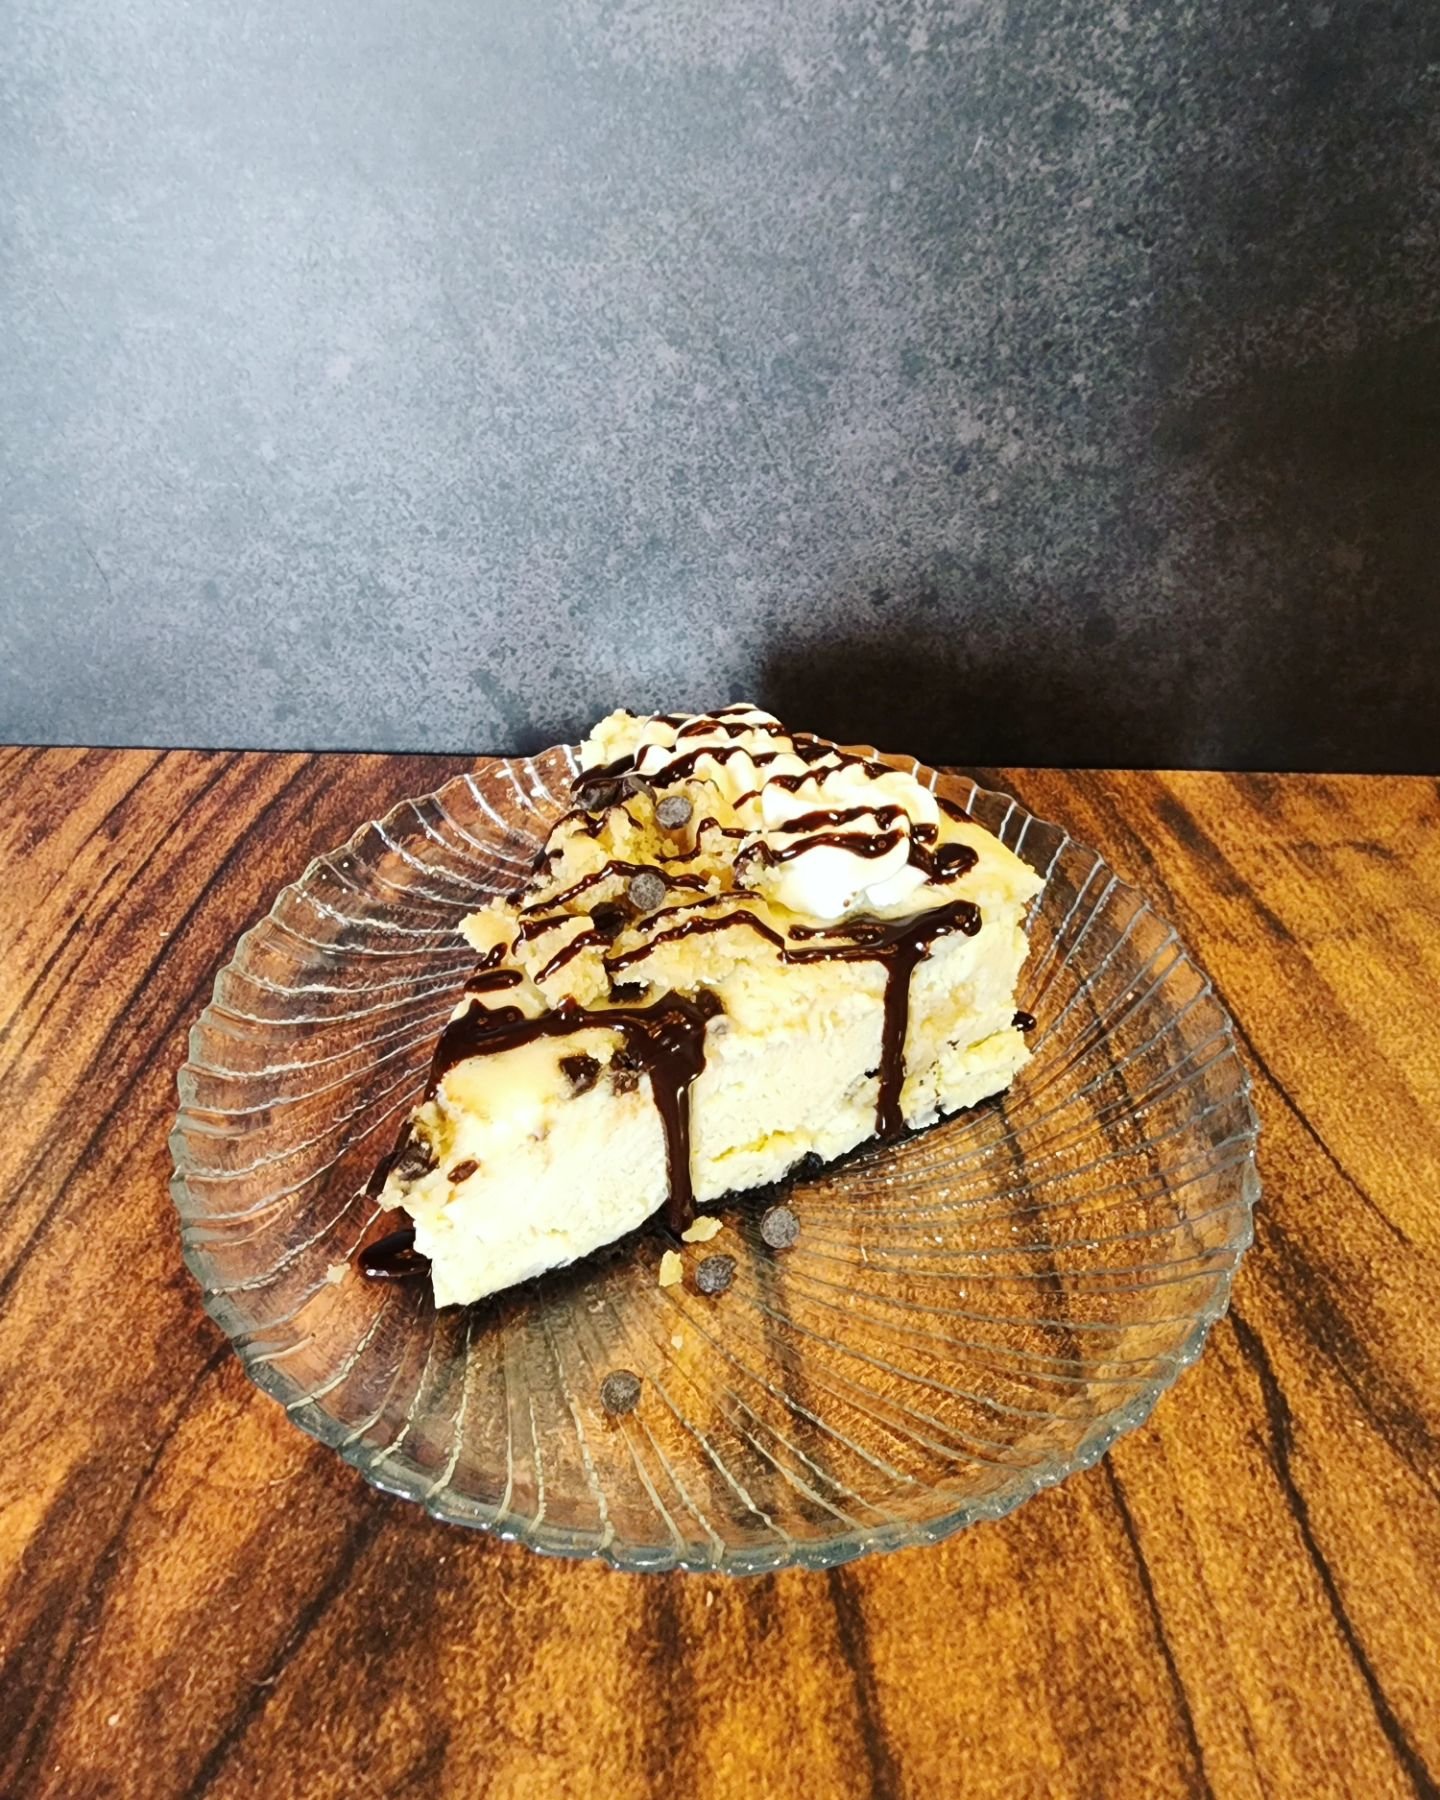 national chocolate chip day calls for;
》choc.  chip cookie dough slices
》big ol chocolate chip cookies 🍪
》caramel cookie dough latte ☕️

6-6 today! 
wednesday is healthcare discount day!

4025 Pontoon Road 
618-491-0901 
Www.steelcitycheesecakes.com